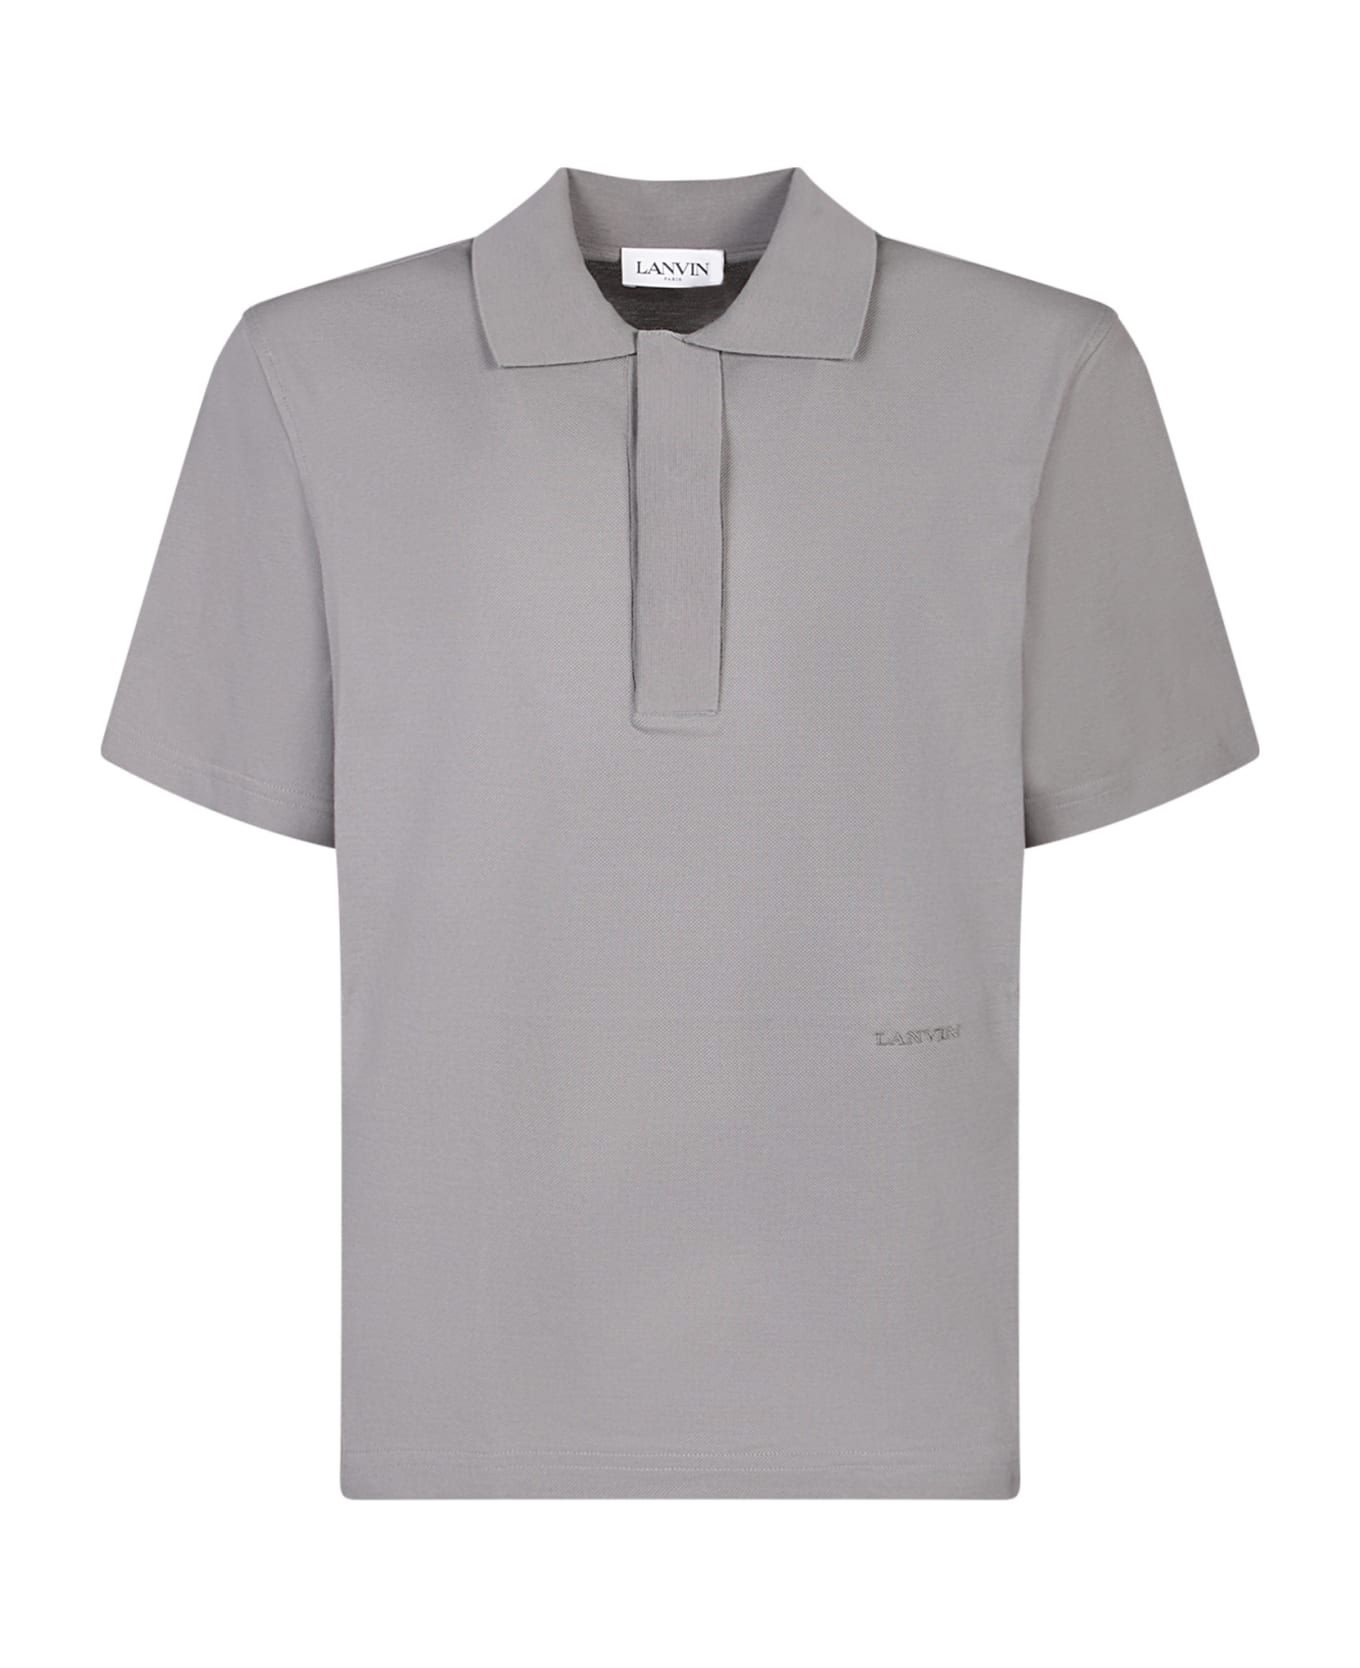 Lanvin Regular Fit Taupe Polo Shirt - Beige ポロシャツ